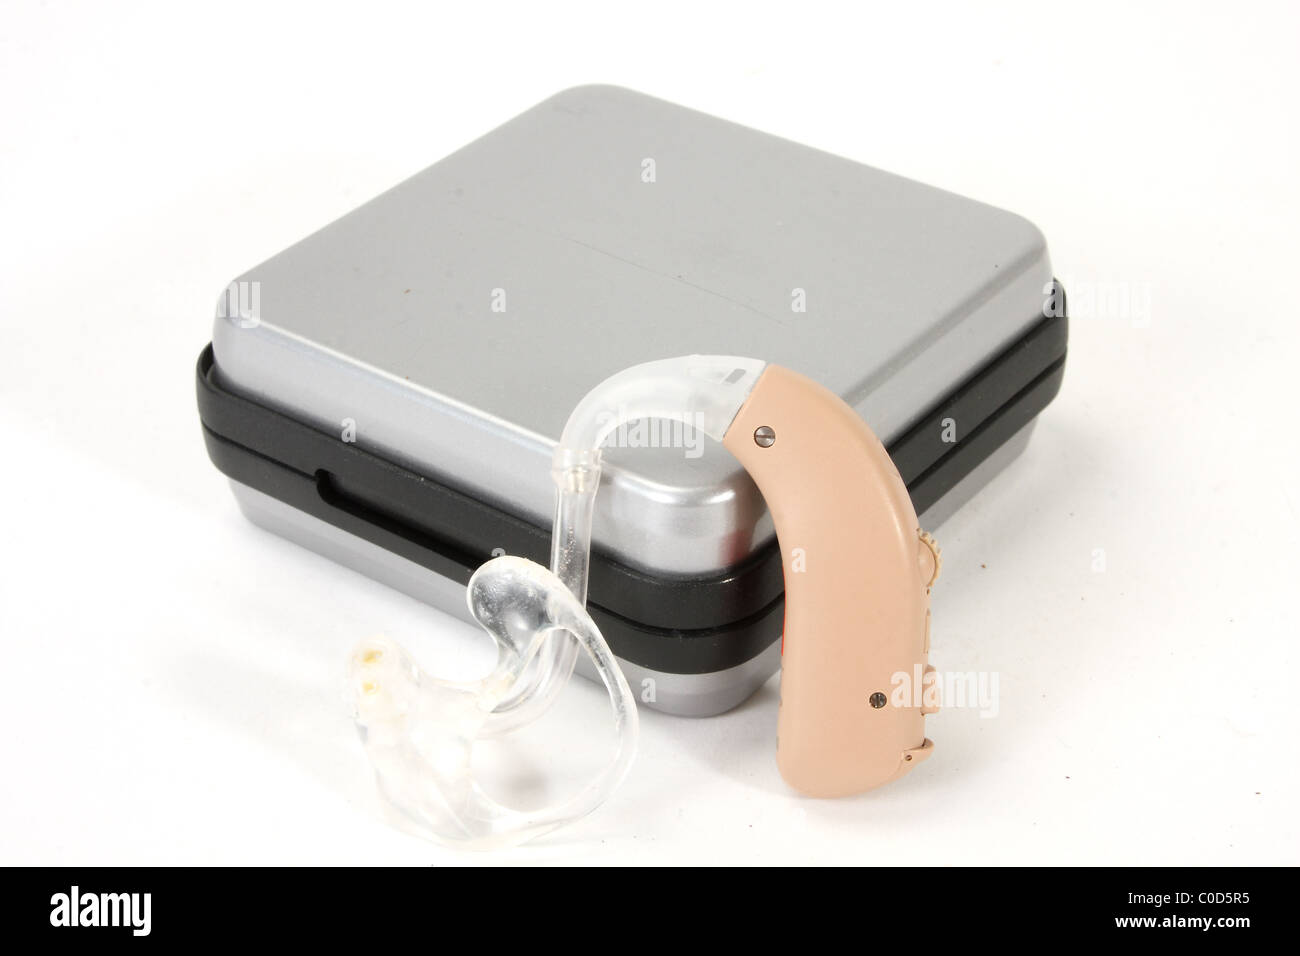 A digital hearing aid by Siemens for a NHS hearing aid fitting. Including an ear mold and box. Stock Photo